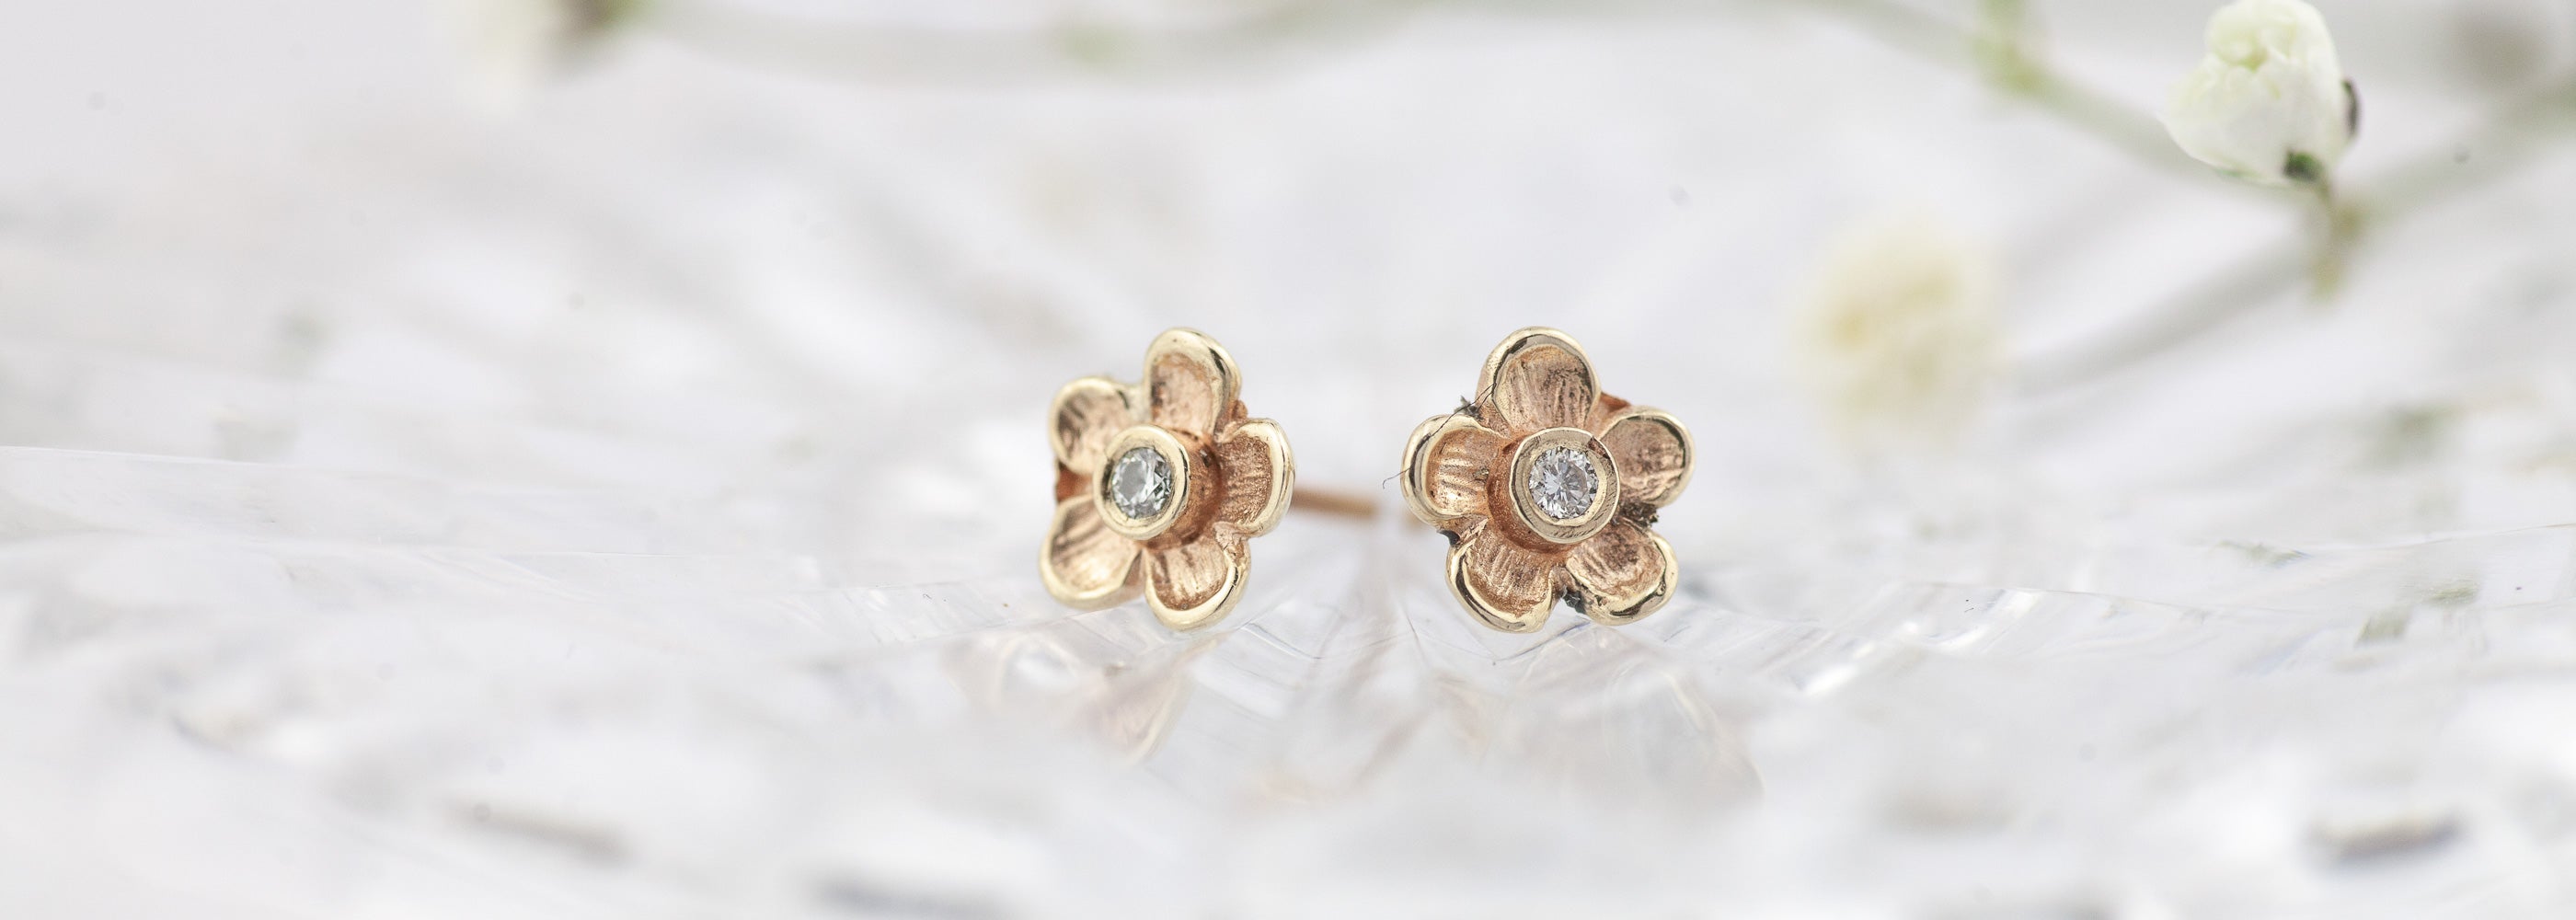 Gold and silver flower earrings